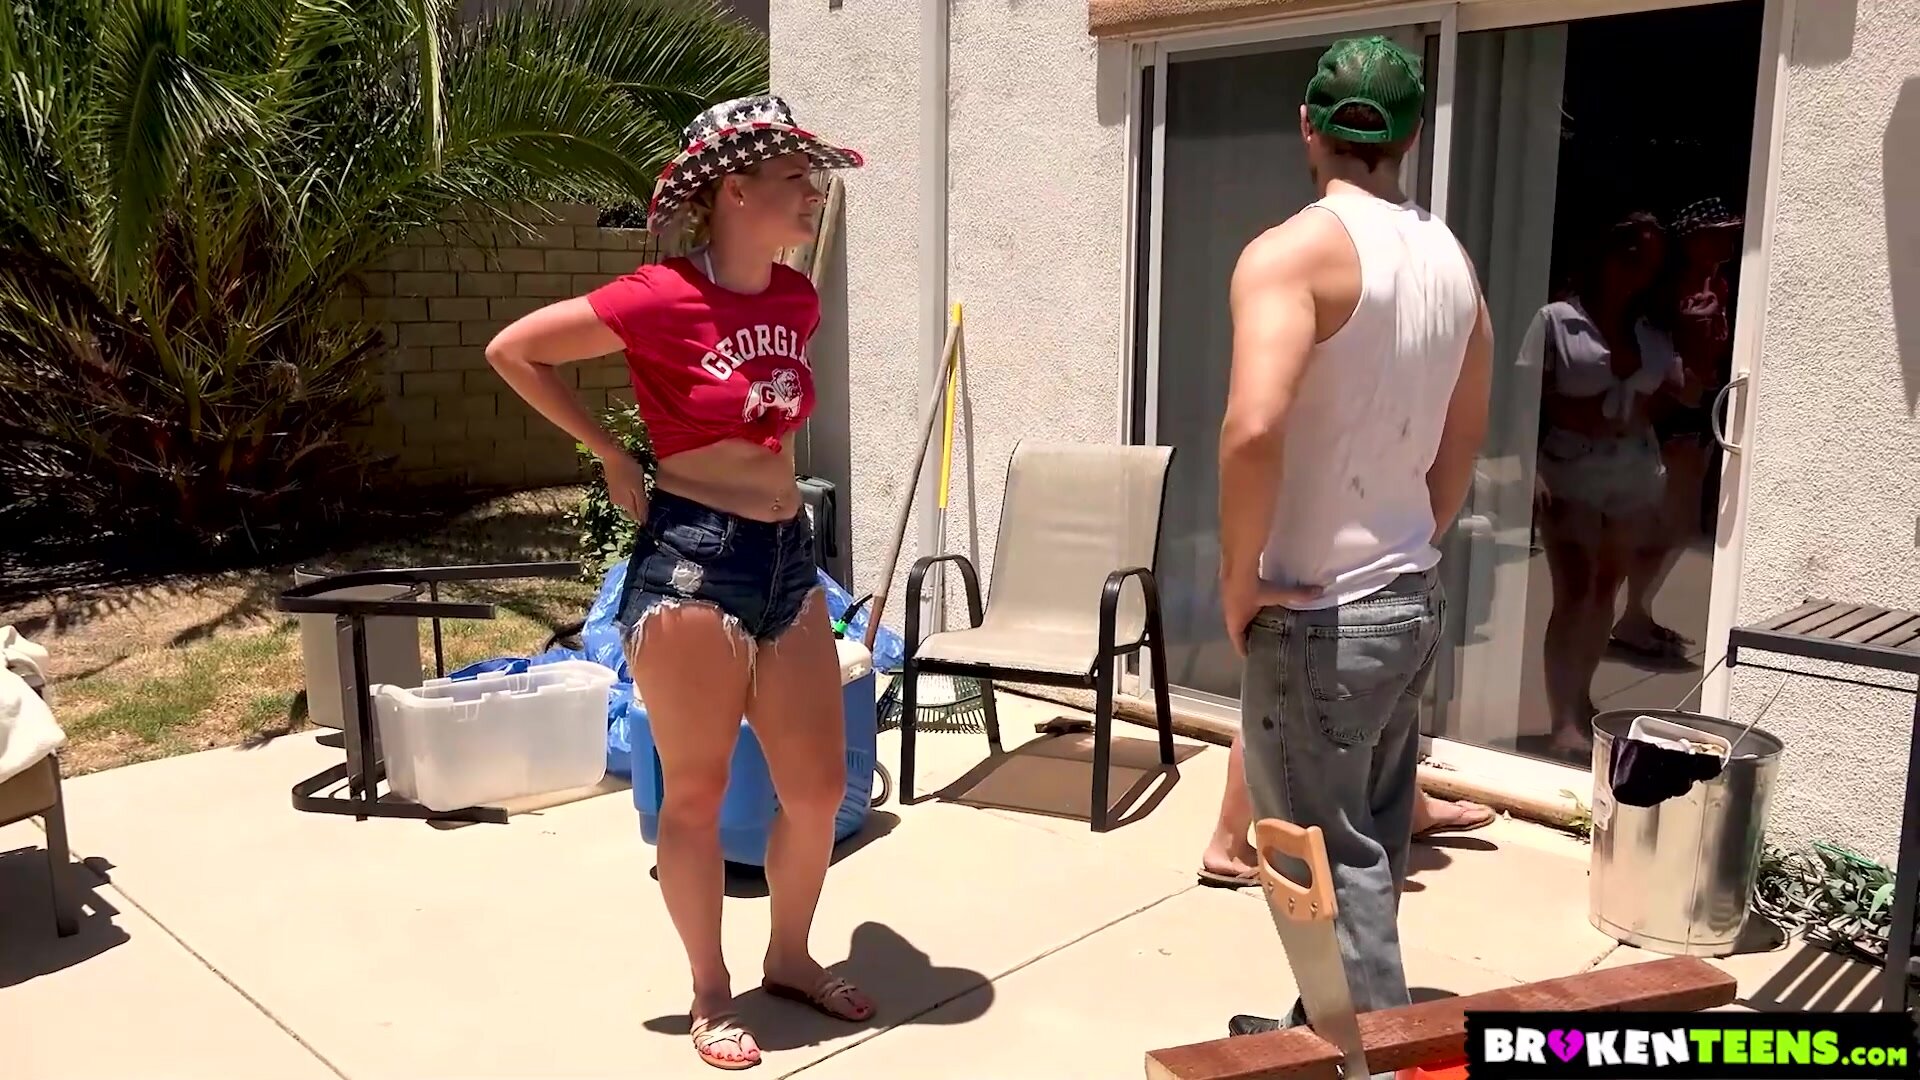 Broken teens – Lisey Sweet's 4th of July country ass fucking with stepdad